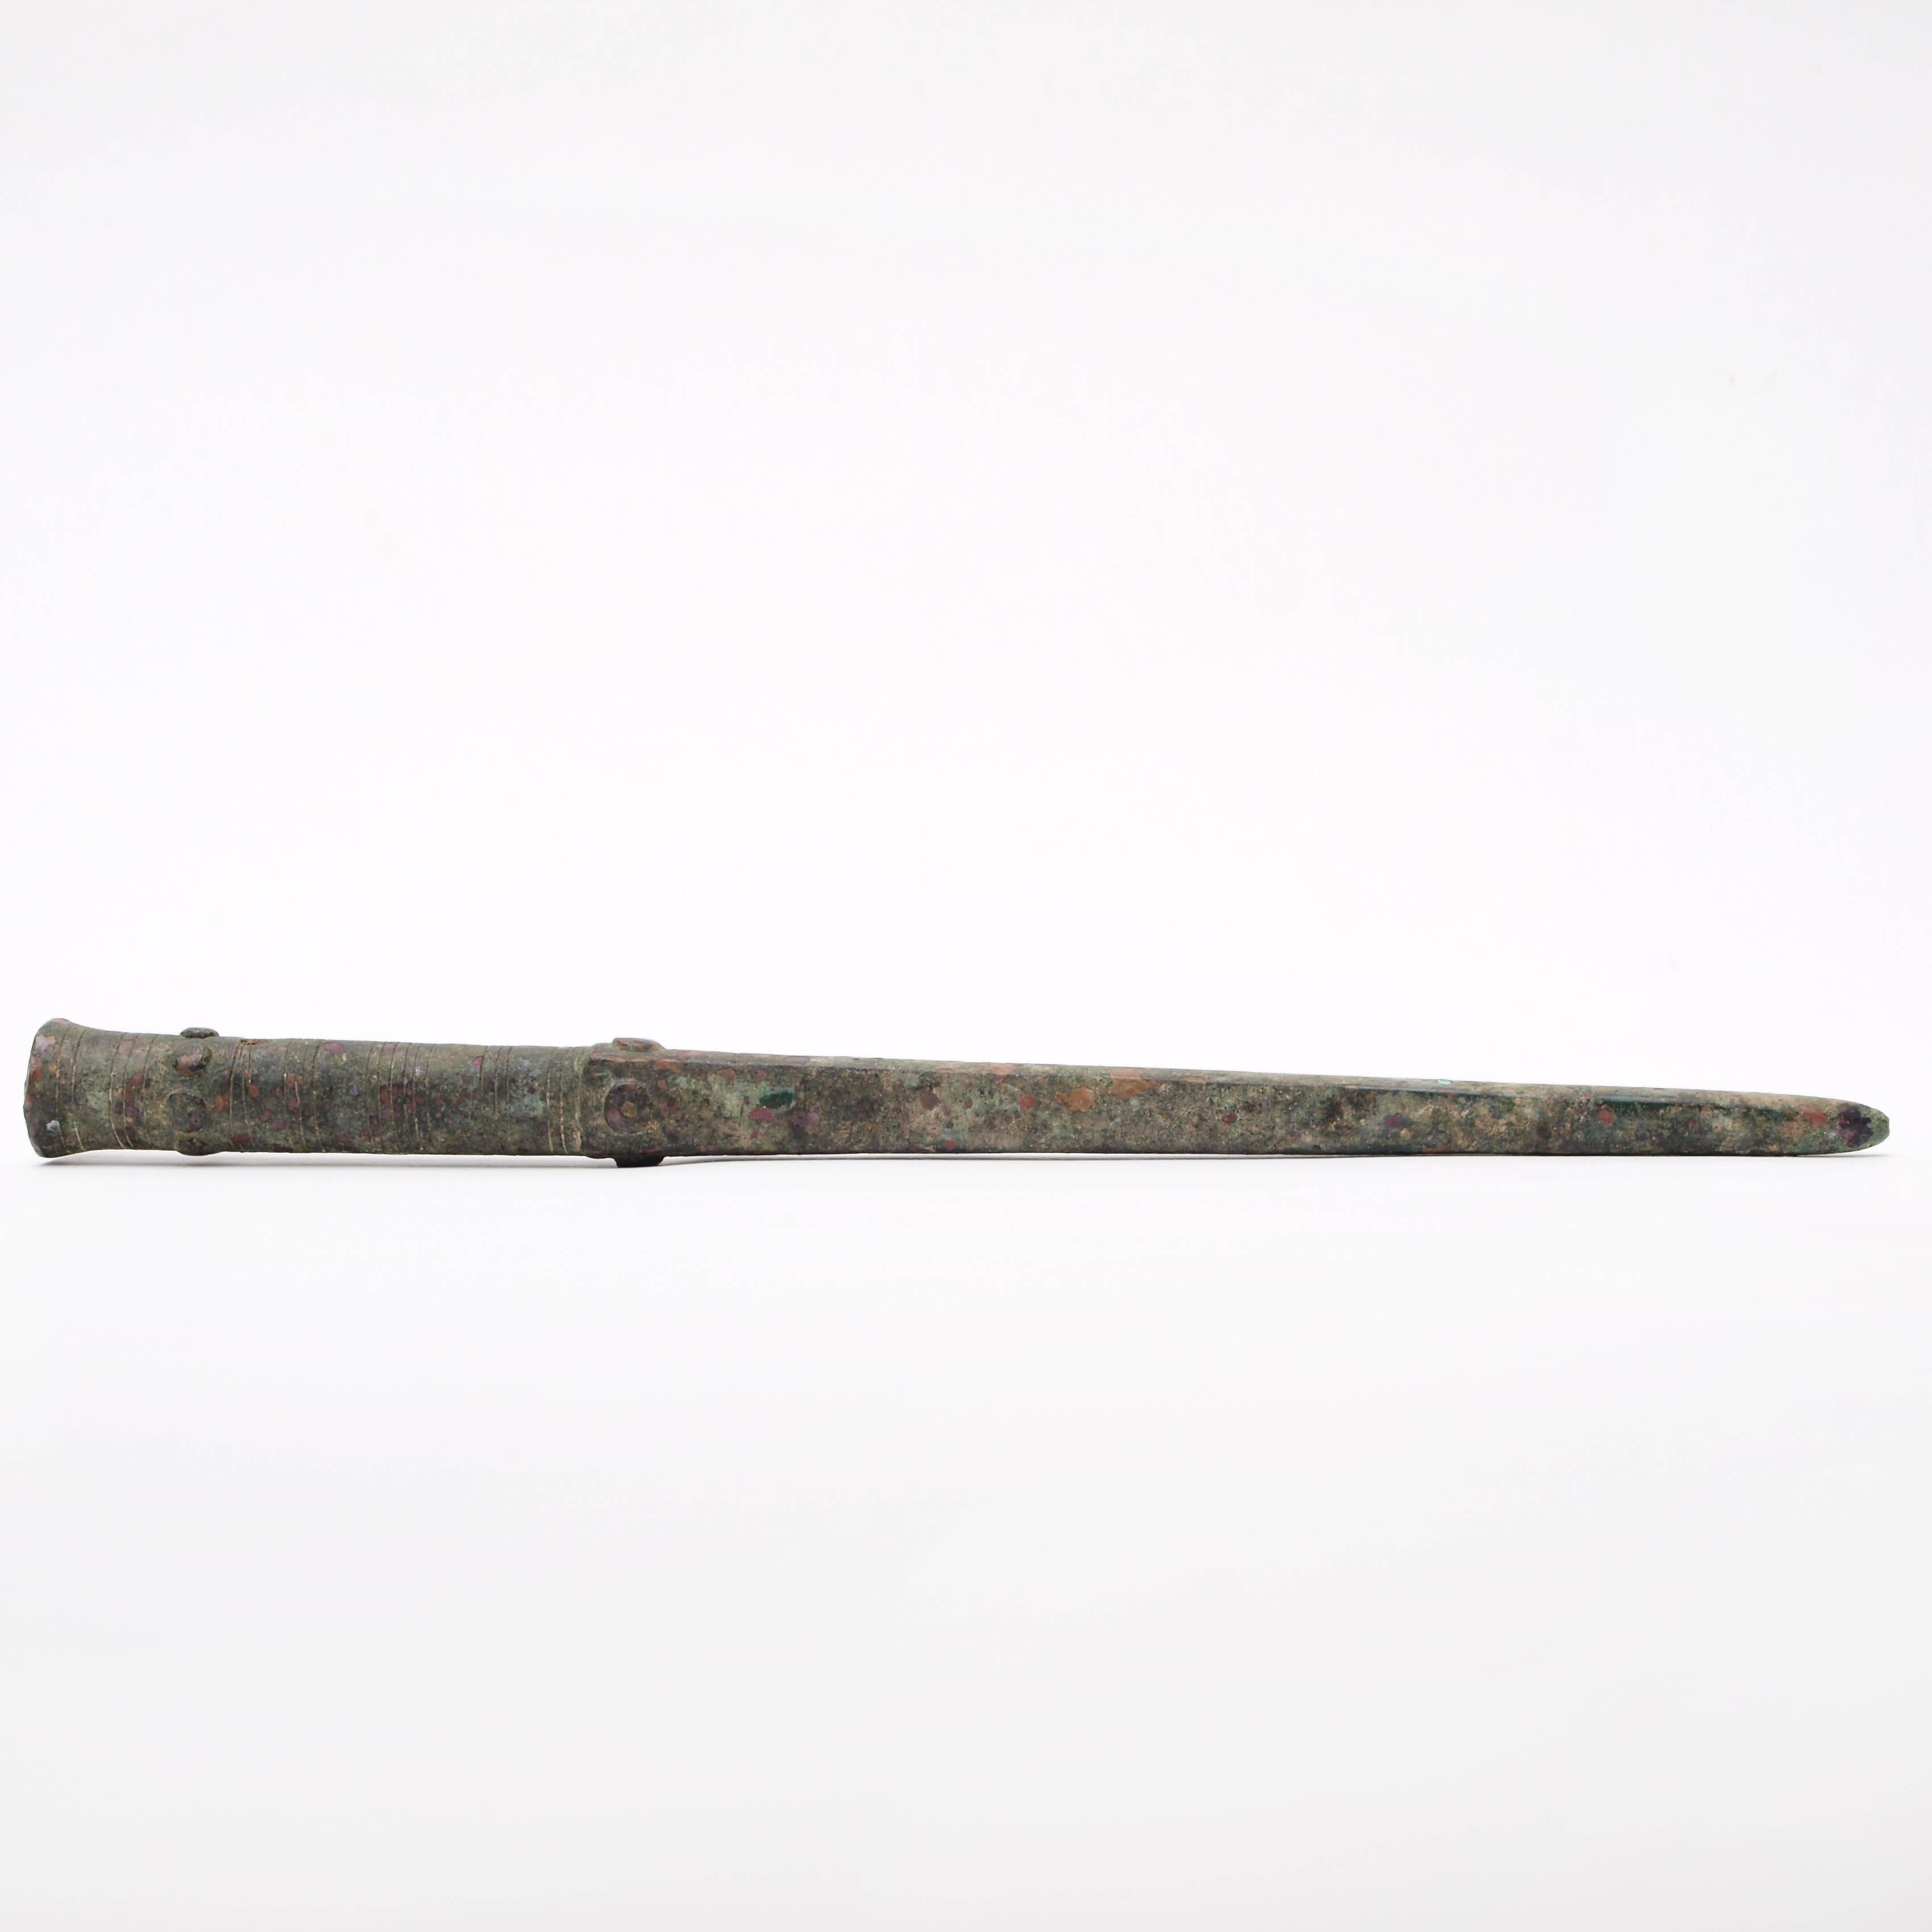 An ancient Roman bronze sauroter or butt spike for a spear or standard with incised lines and raised boss detailing around the socket.